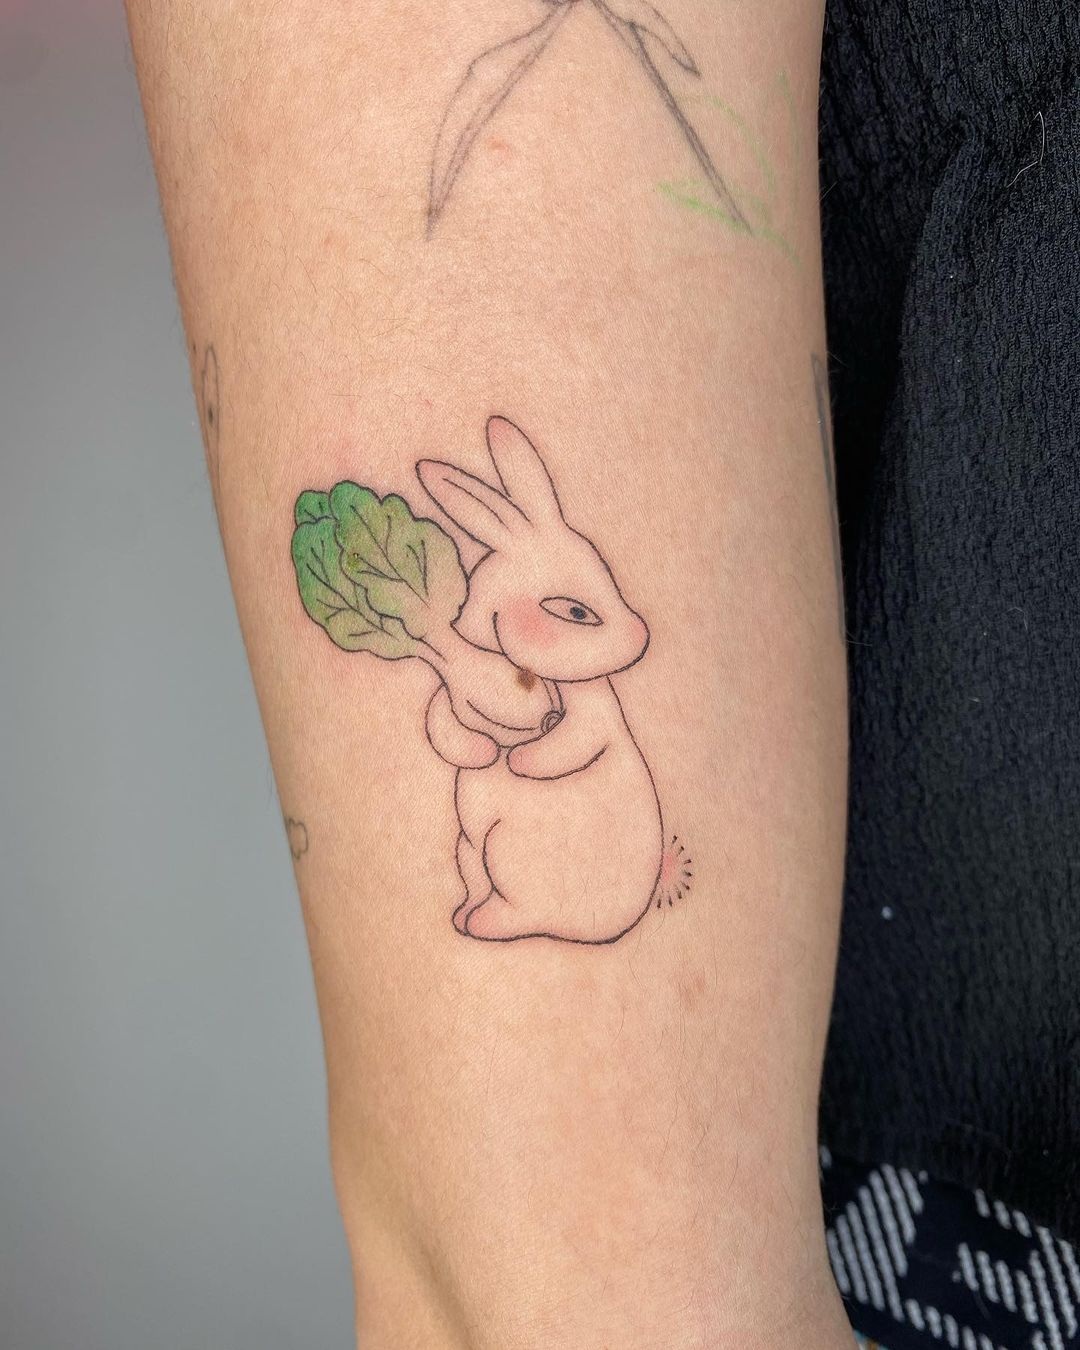 Asian Arm Tattoos With A Rabbit